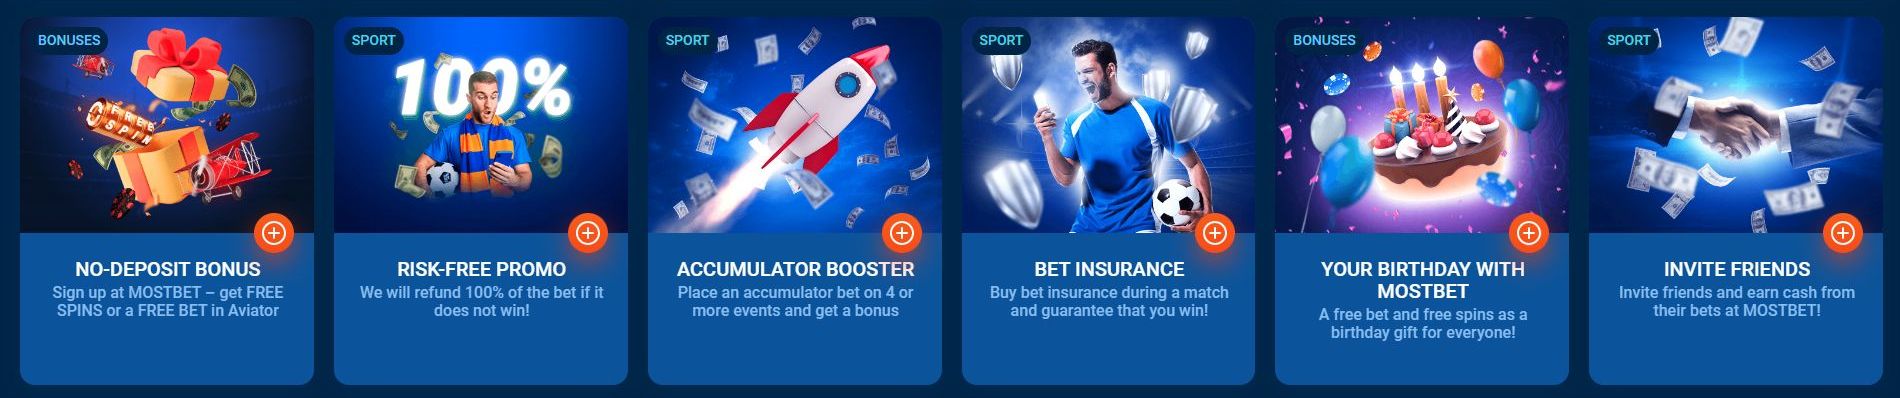 Bonuses from Mostbet